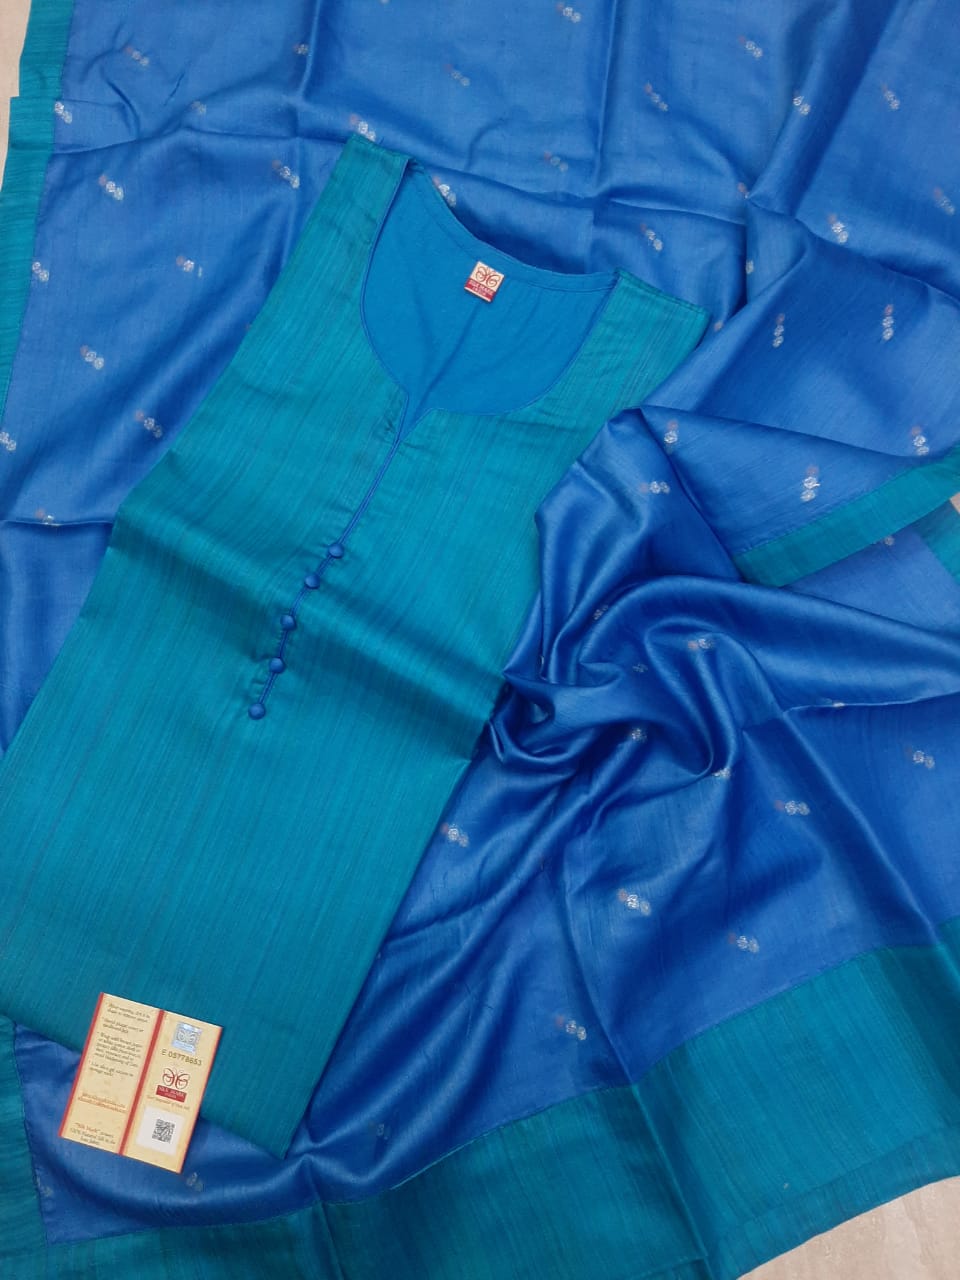 Pure tusser silk suits